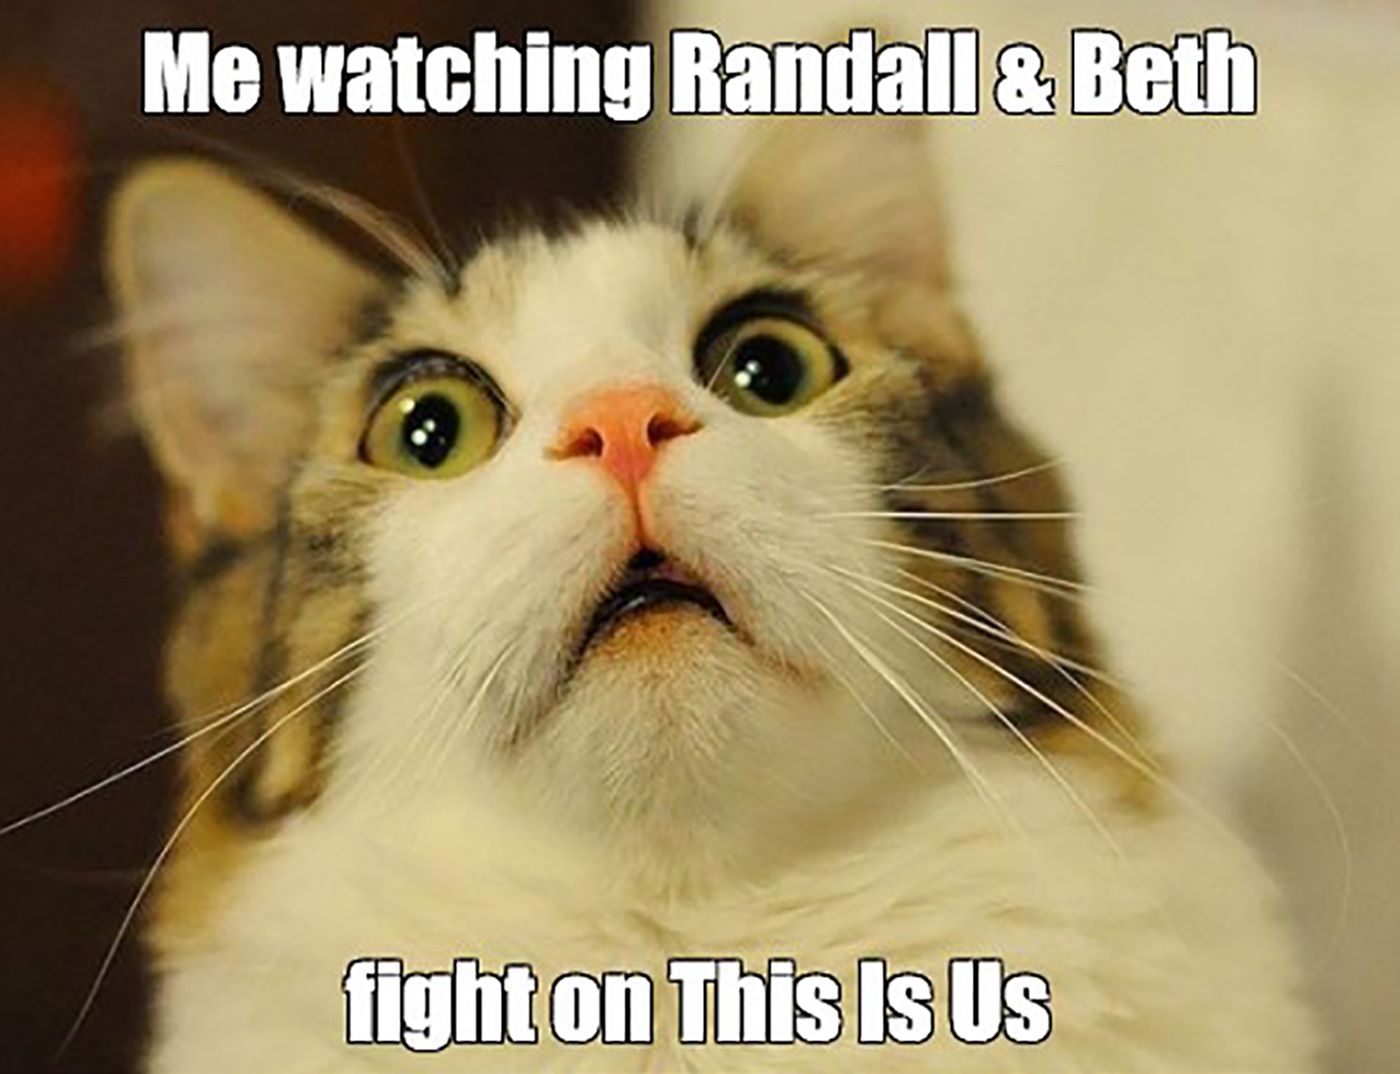 this is us randall and beth fight